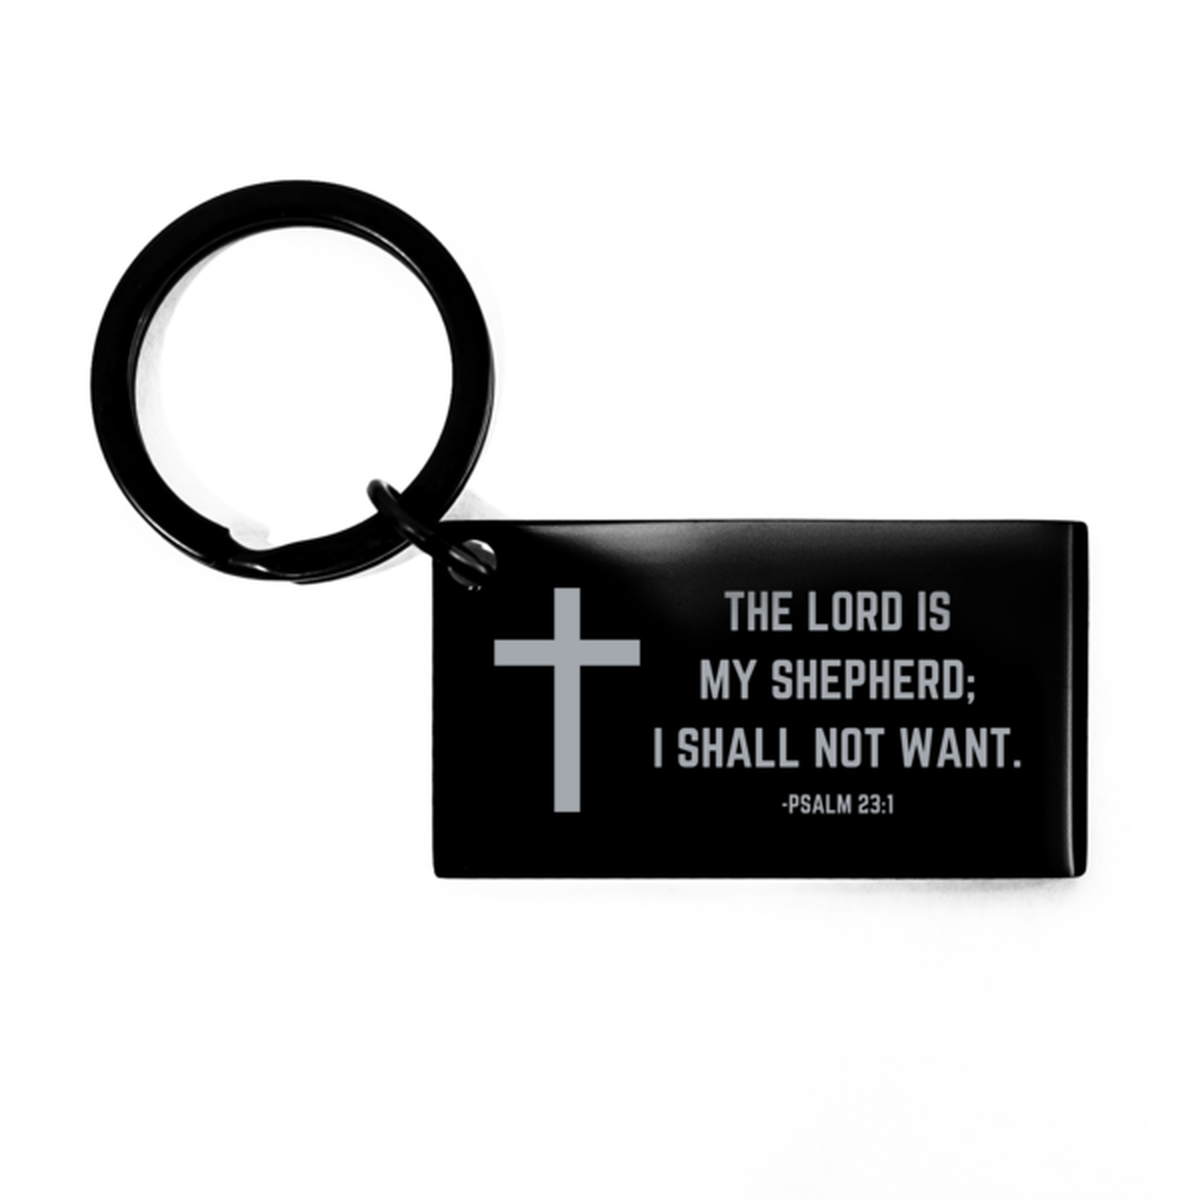 Baptism Gifts For Teenage Boys Girls, Christian Bible Verse Black Keychain, The Lord is my shepherd, Confirmation Gifts, Bible Verse Keyring for Son, Godson, Grandson, Nephew